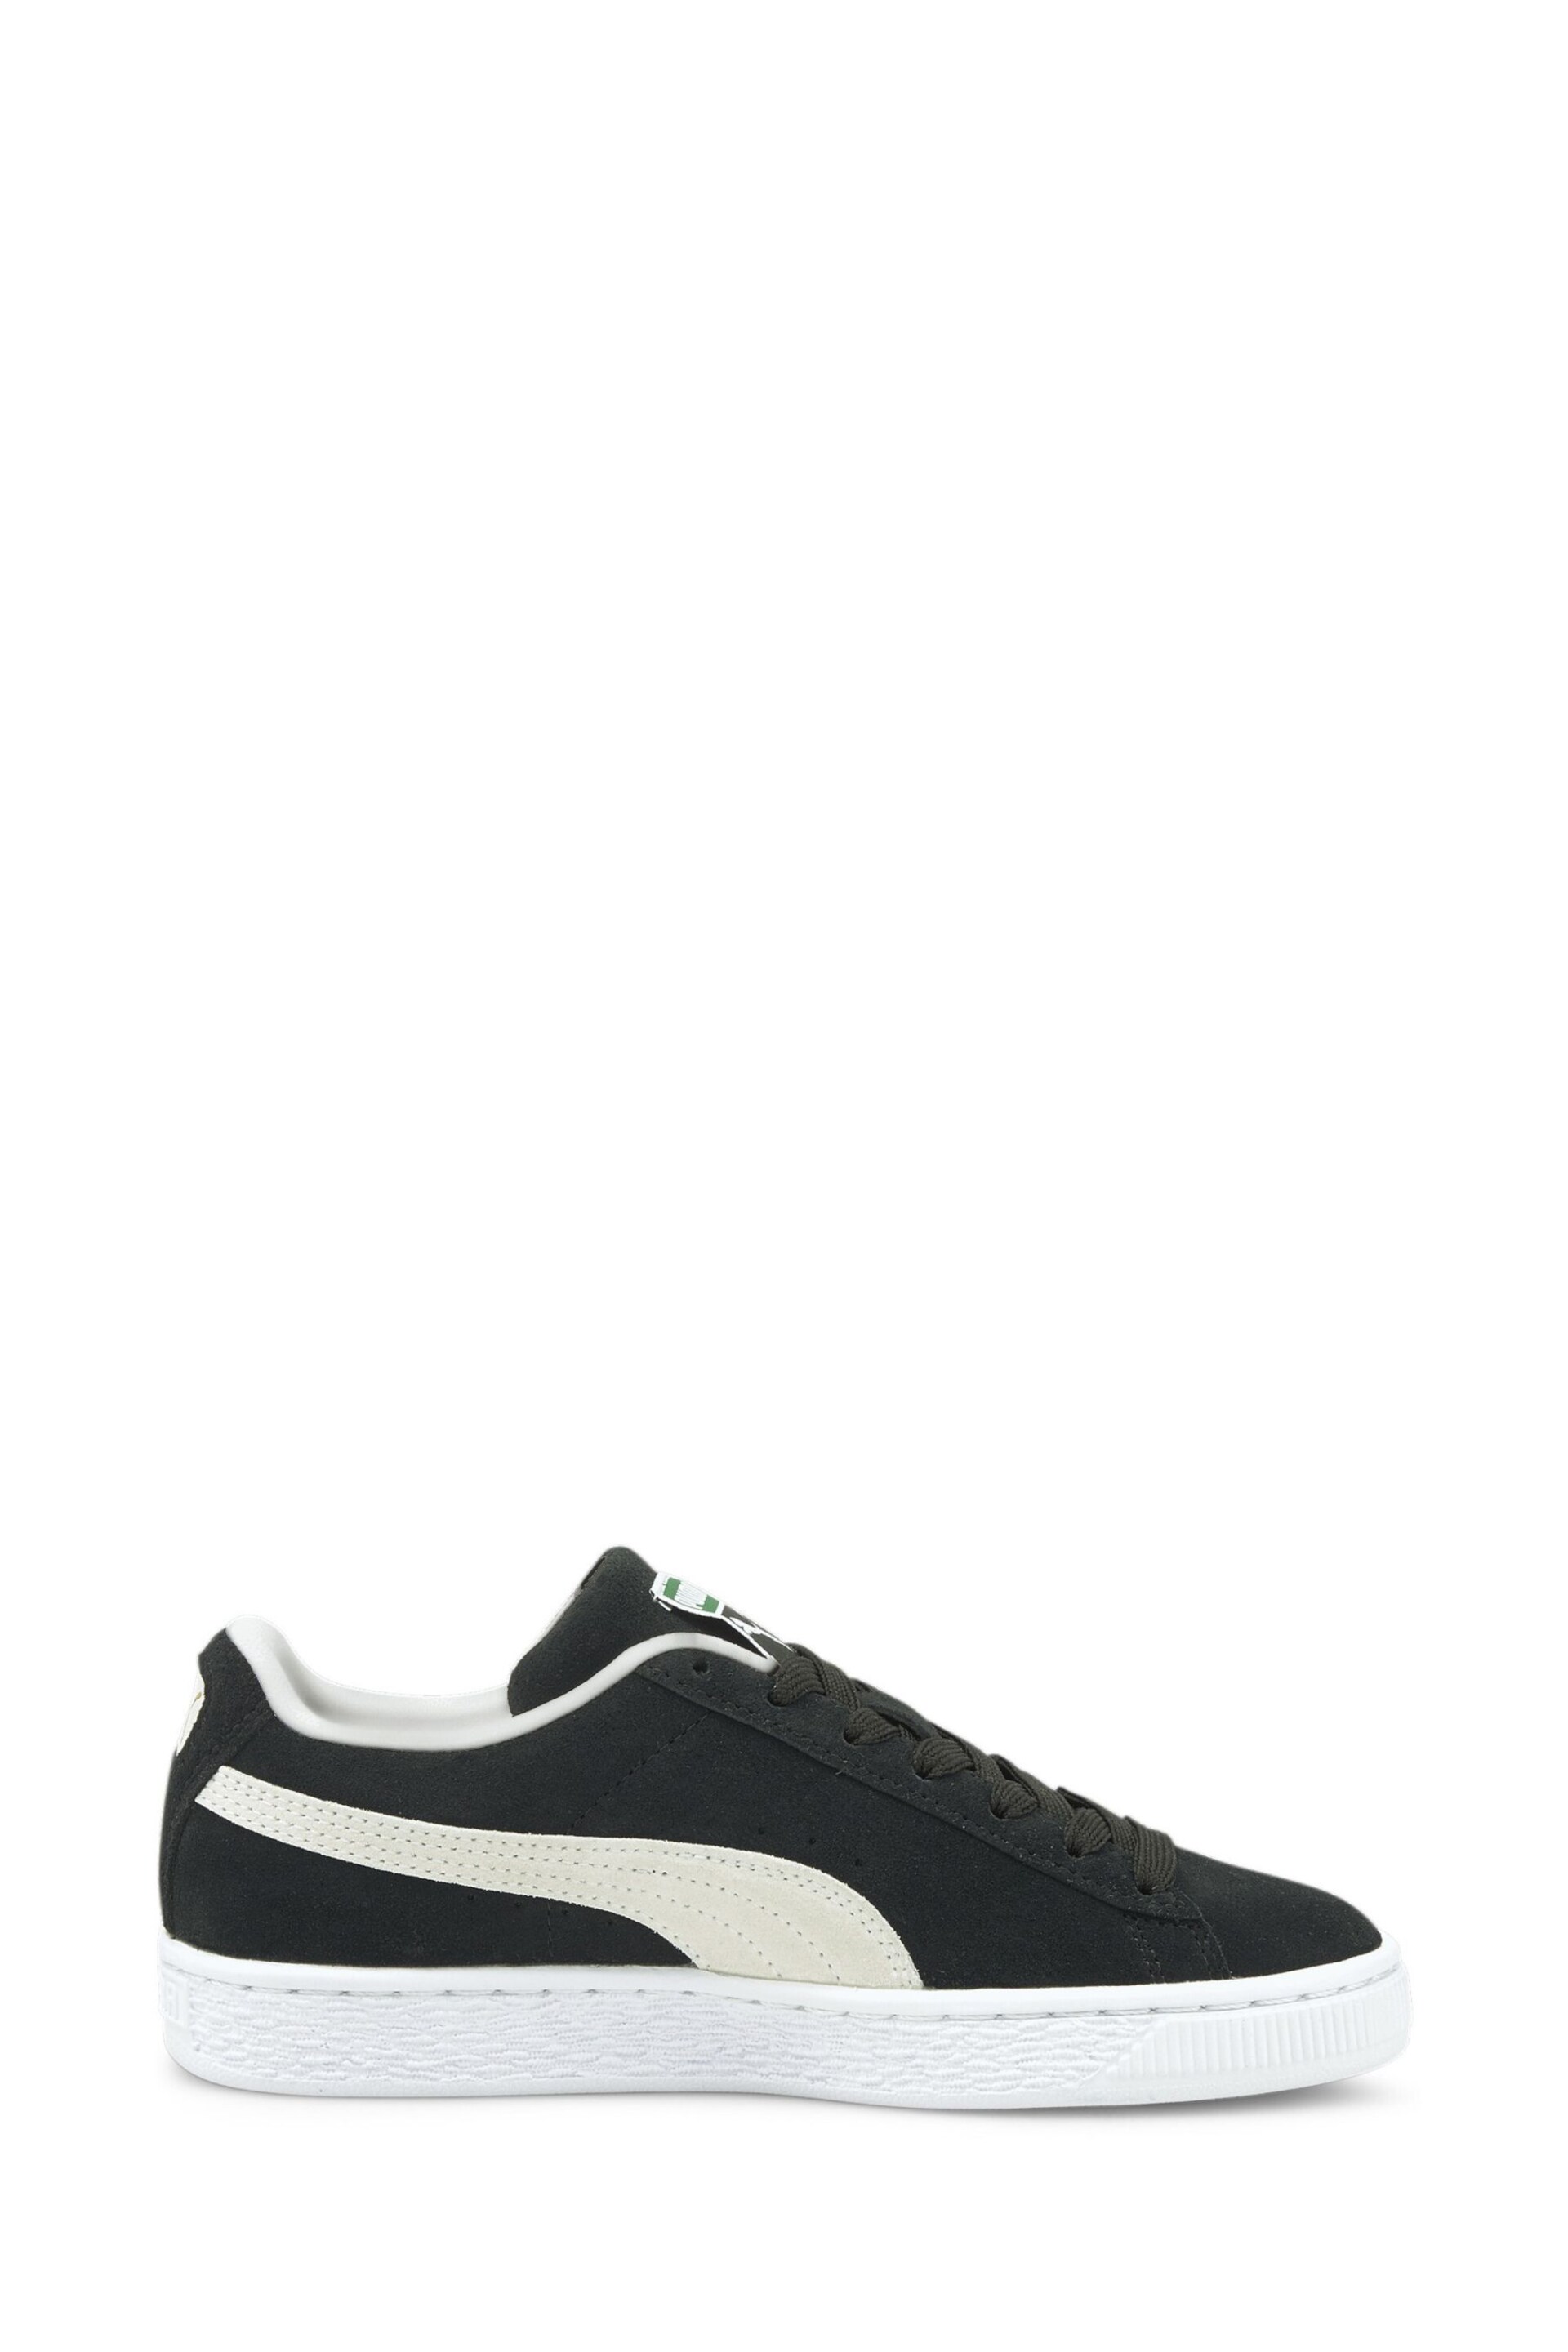 Puma Black Suede Classic XXI Youth Trainers - Image 1 of 7